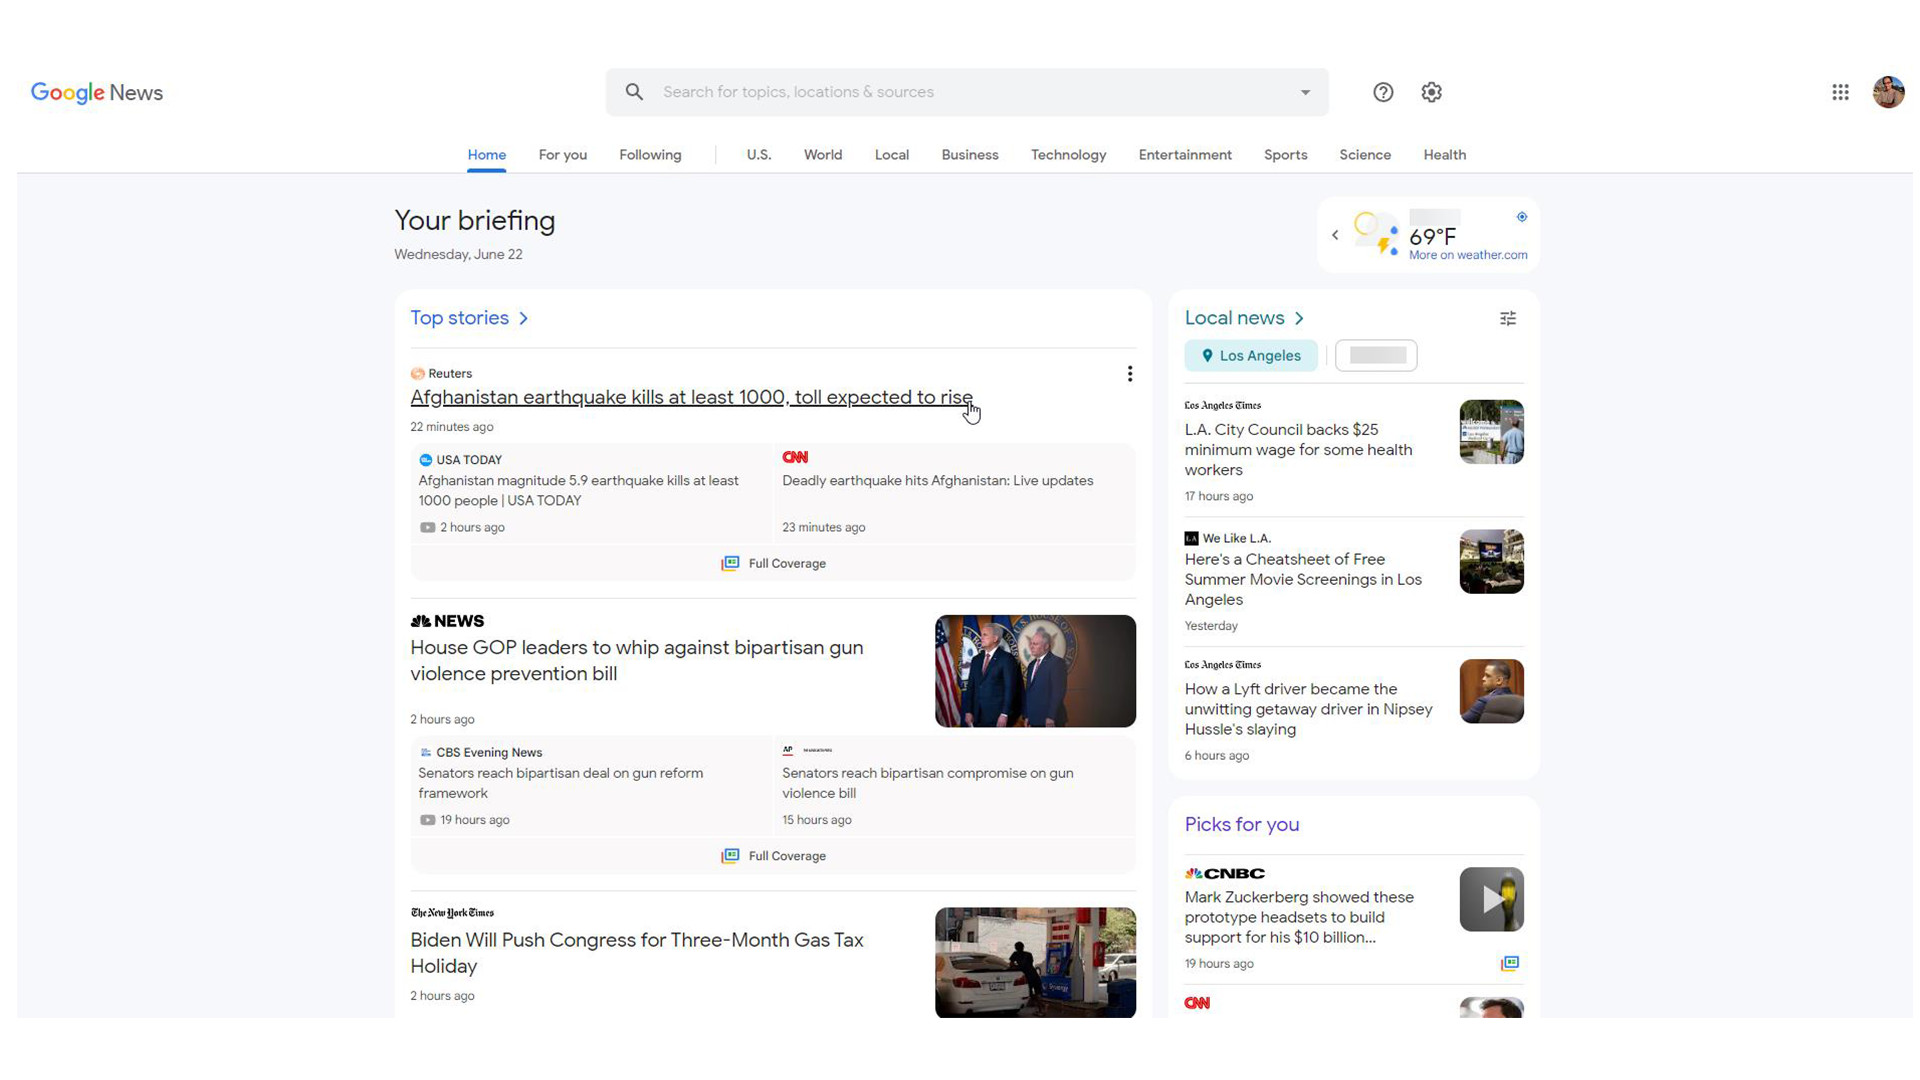 Image of the new Google News